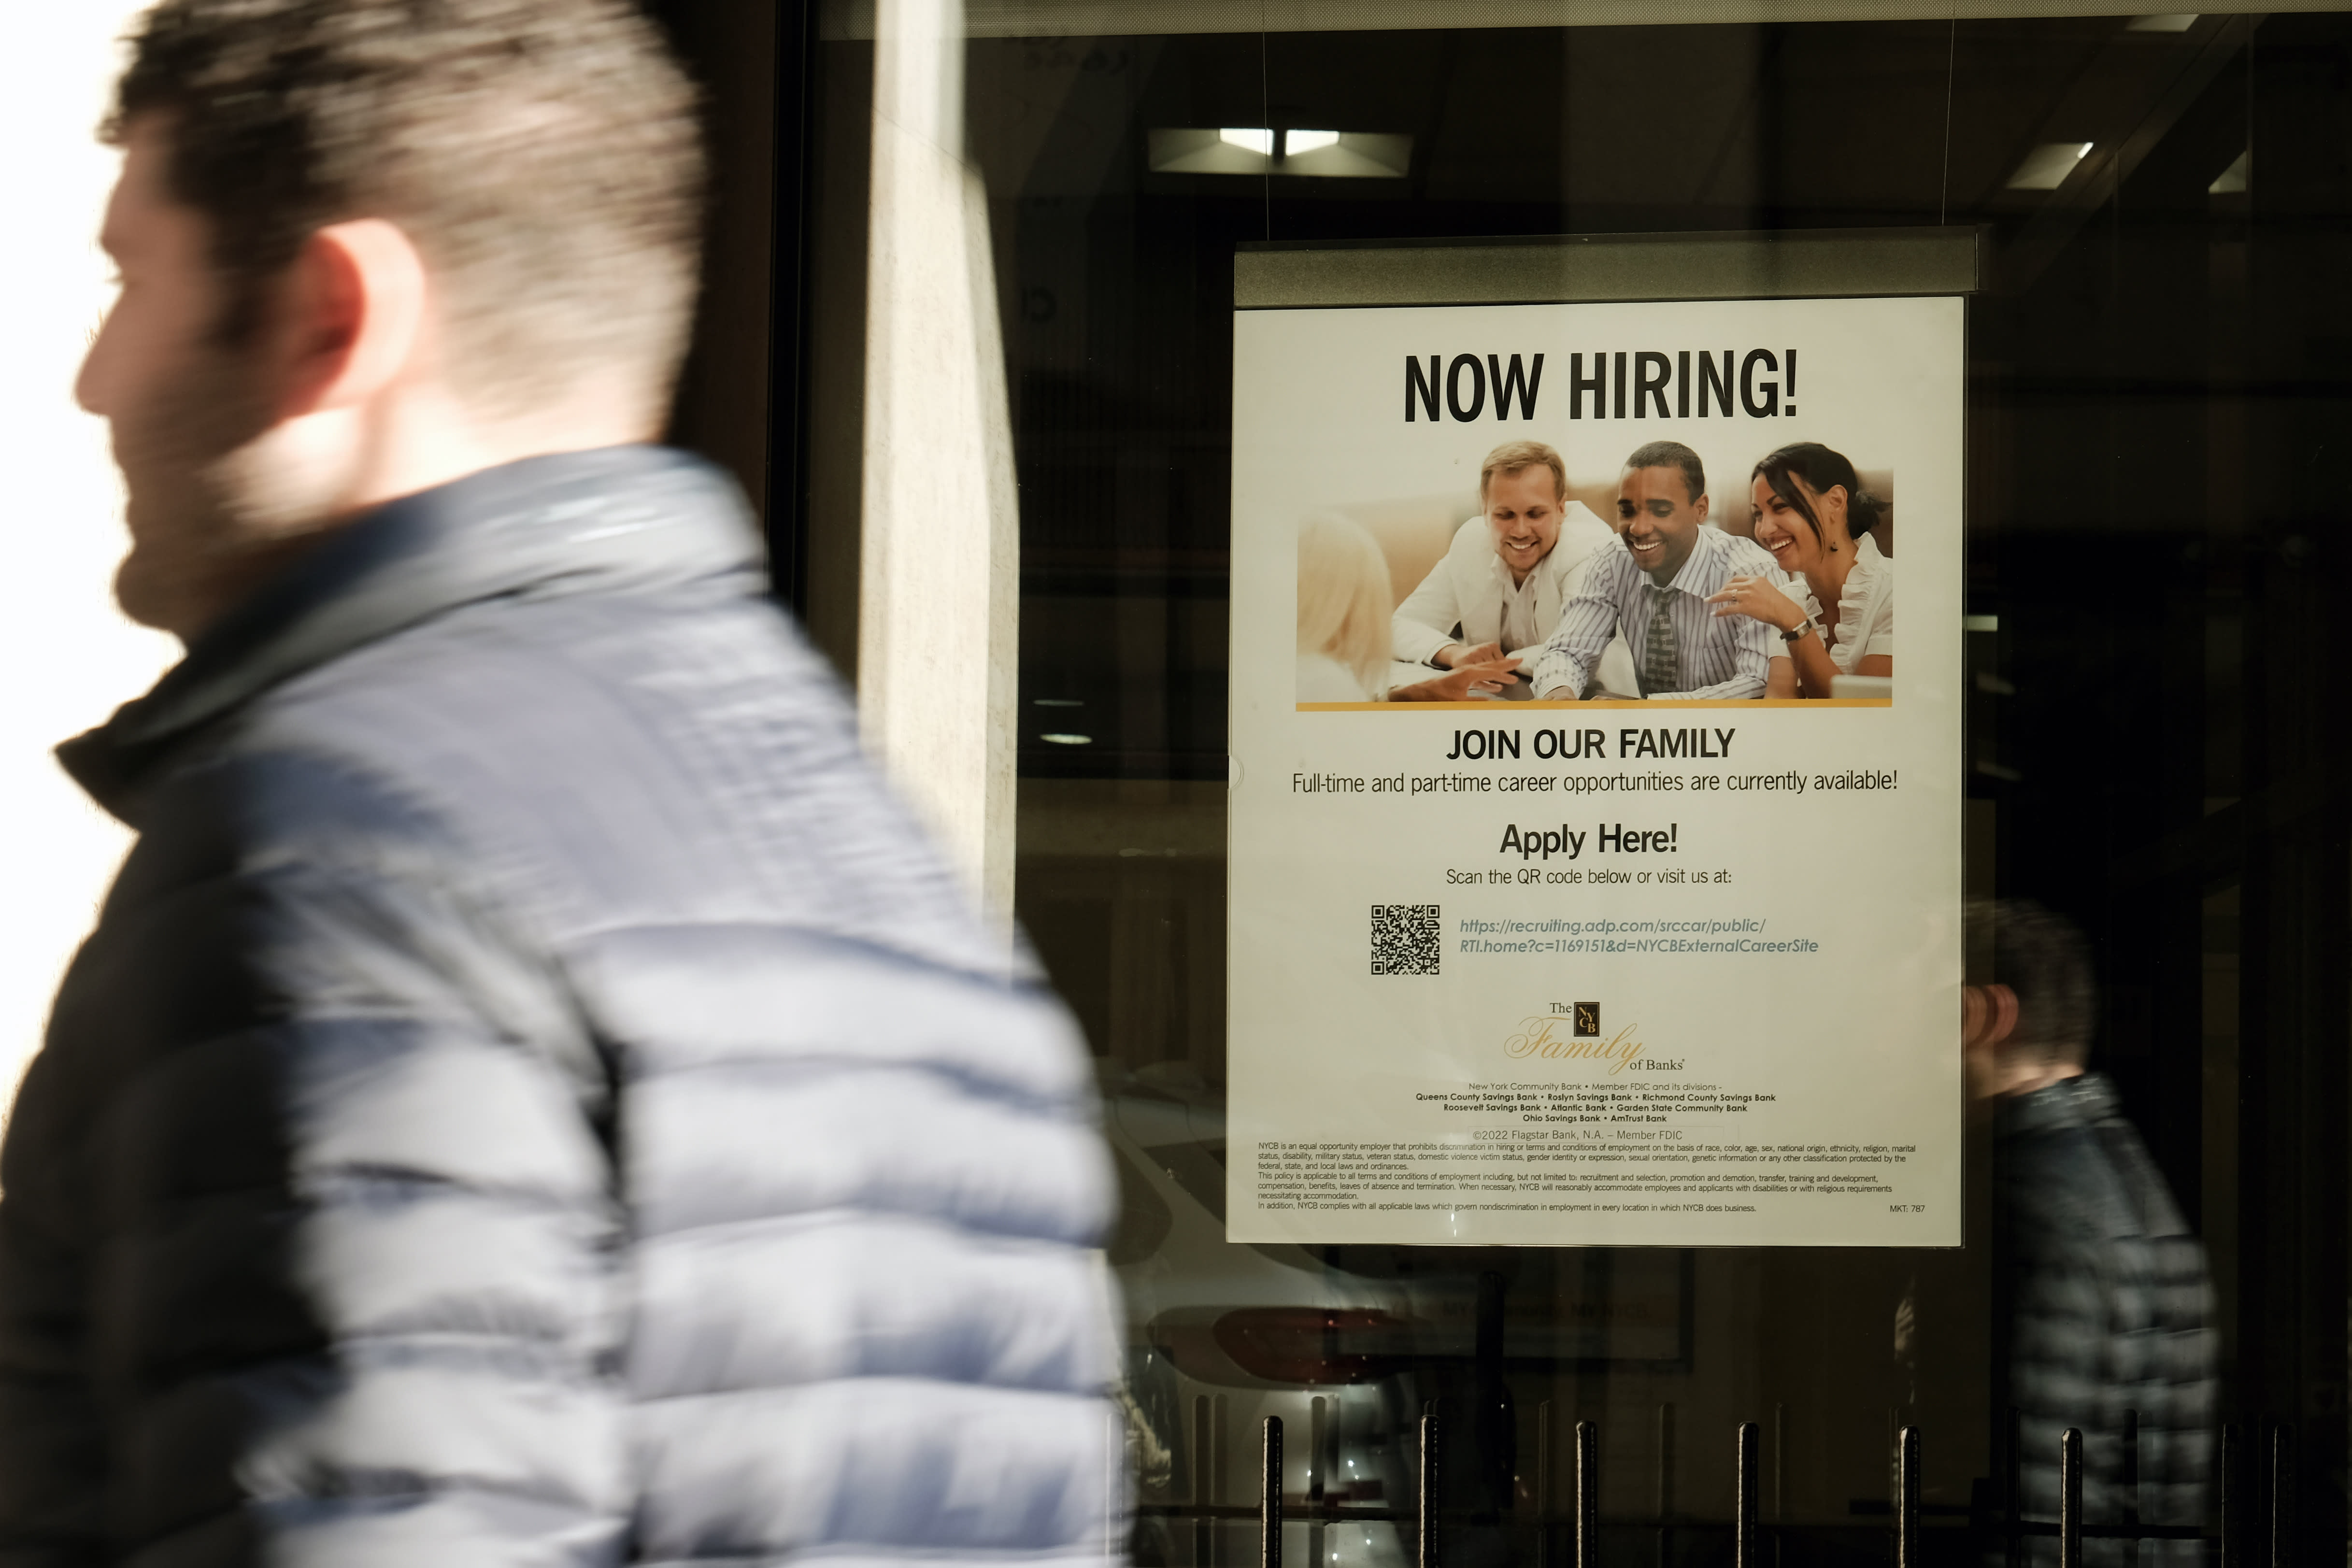 ADP says US job growth slowed sharply to 177,000 jobs in August, below expectations.